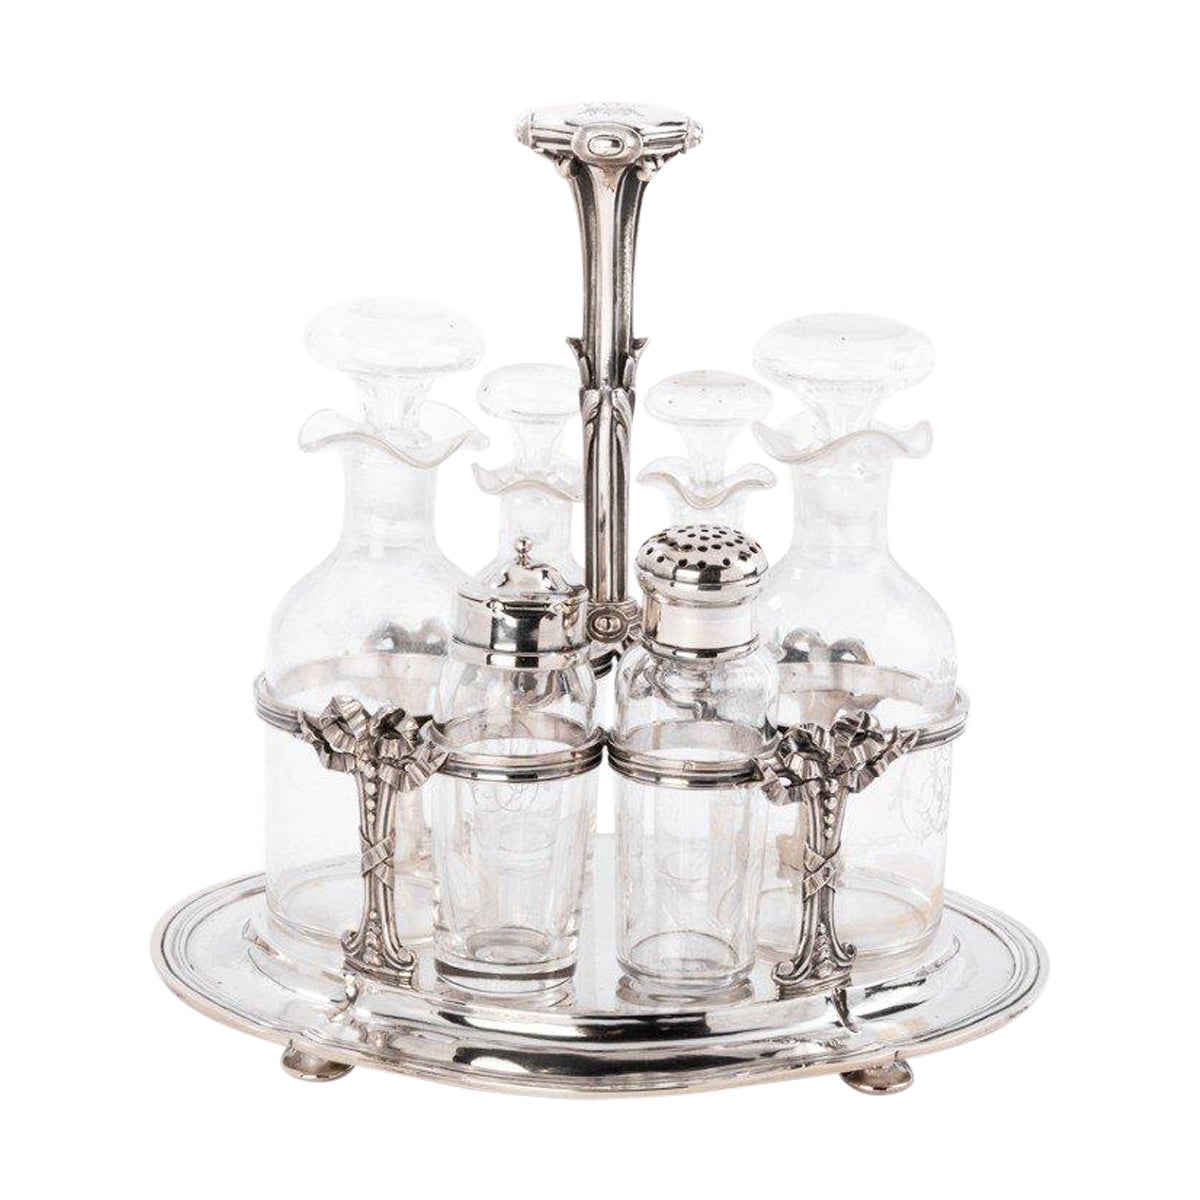 Silversmith Odiot - Cruet / Vinegar In Solid Silver/Crystal Late 19th Century For Sale